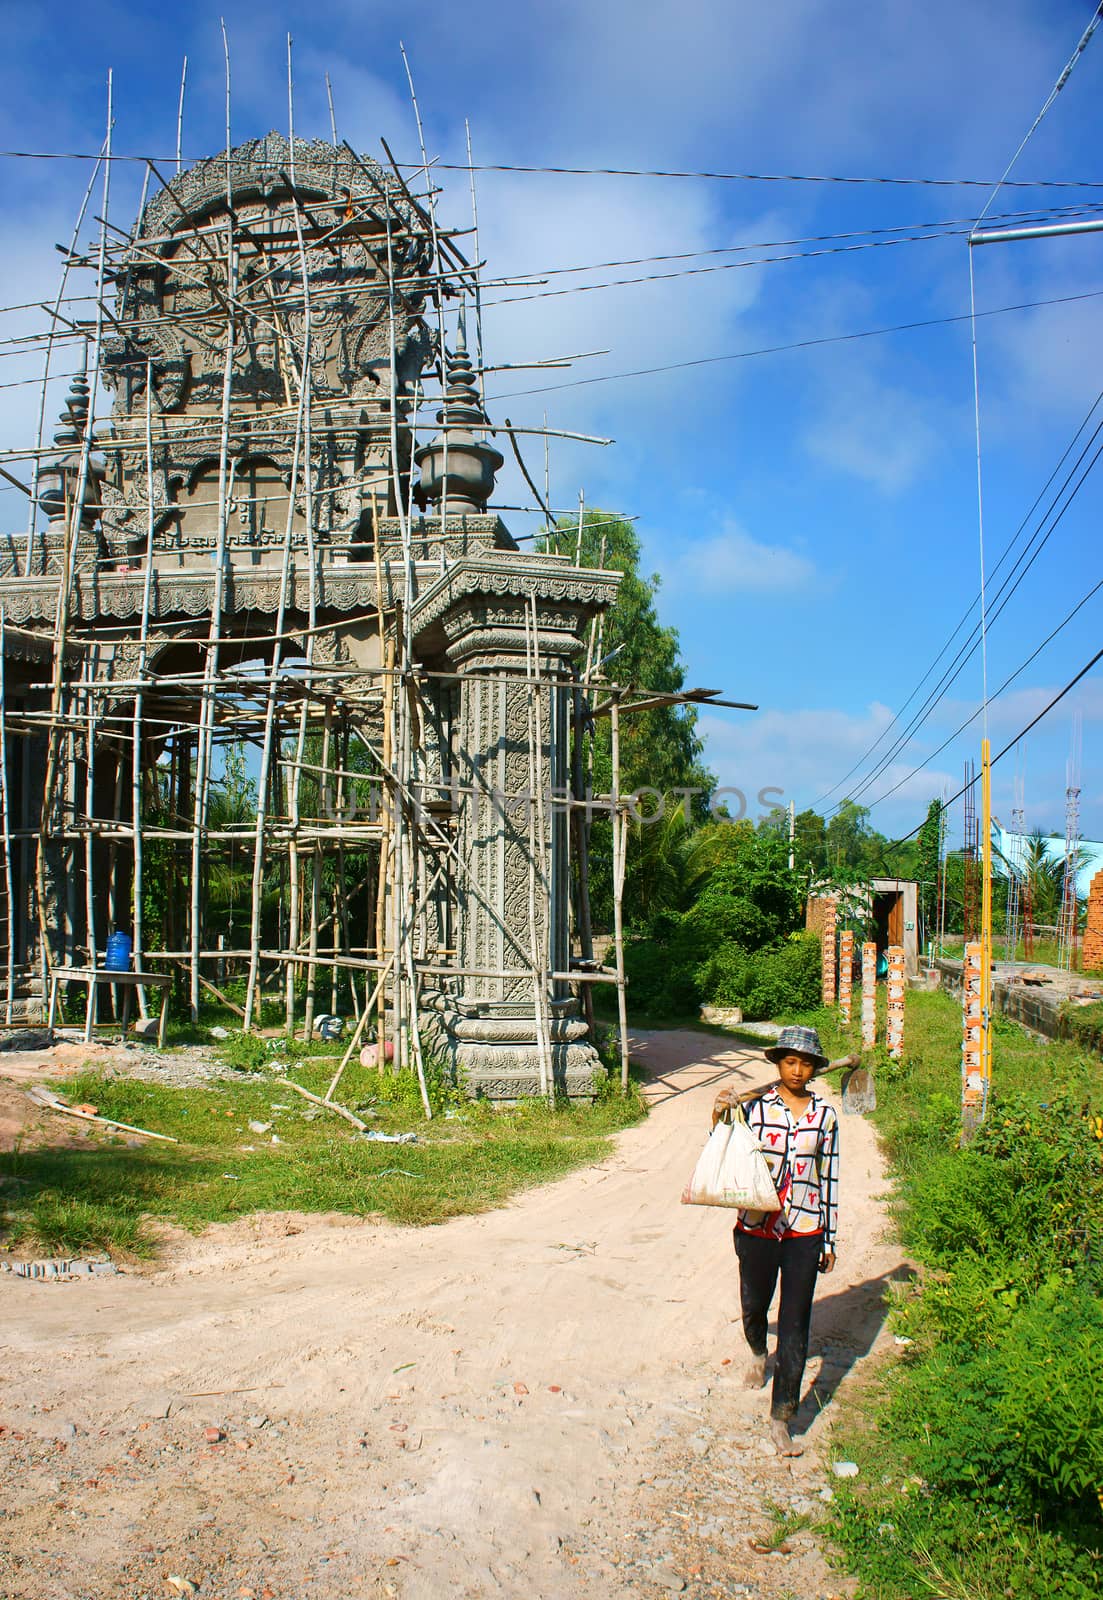 AN GIANG, VIET NAM- SEPT 20: Asian farmer carry tool walking on countryside path, construction work to construct khmer pagoda gate with pattern, development of religion, Vietnam, Sept 20, 2014